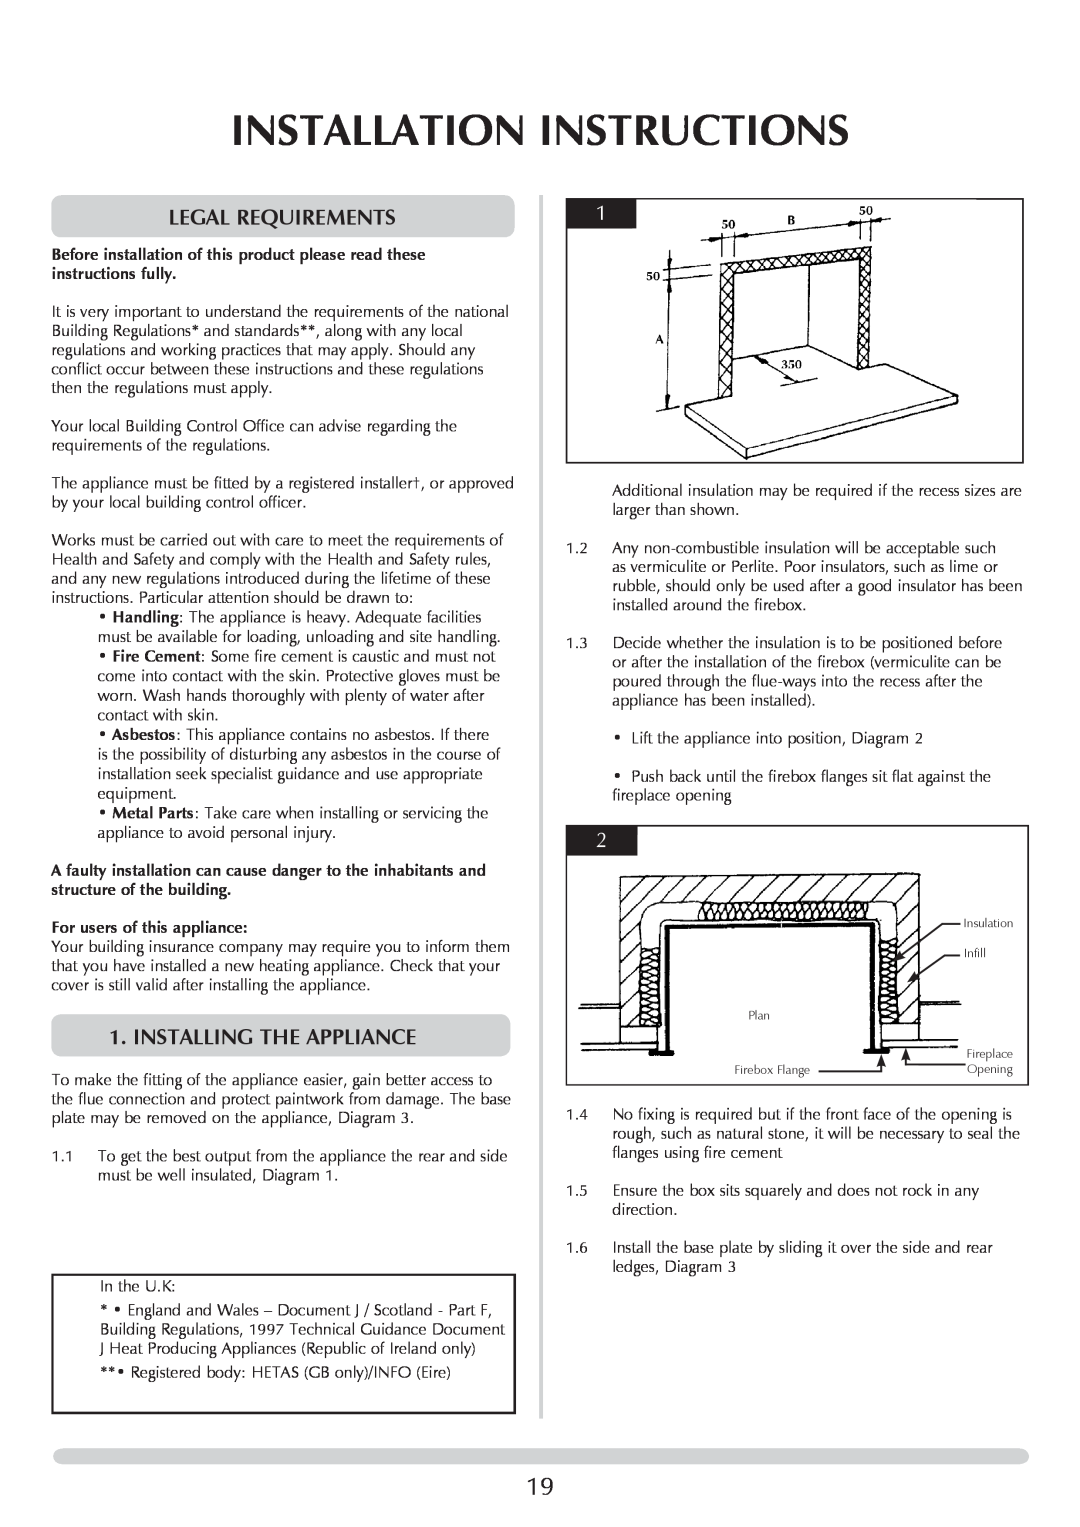 Stovax Open Log Burning Convector Fireboxes manual Installation Instructions, Legal requirements, Installing the Appliance 